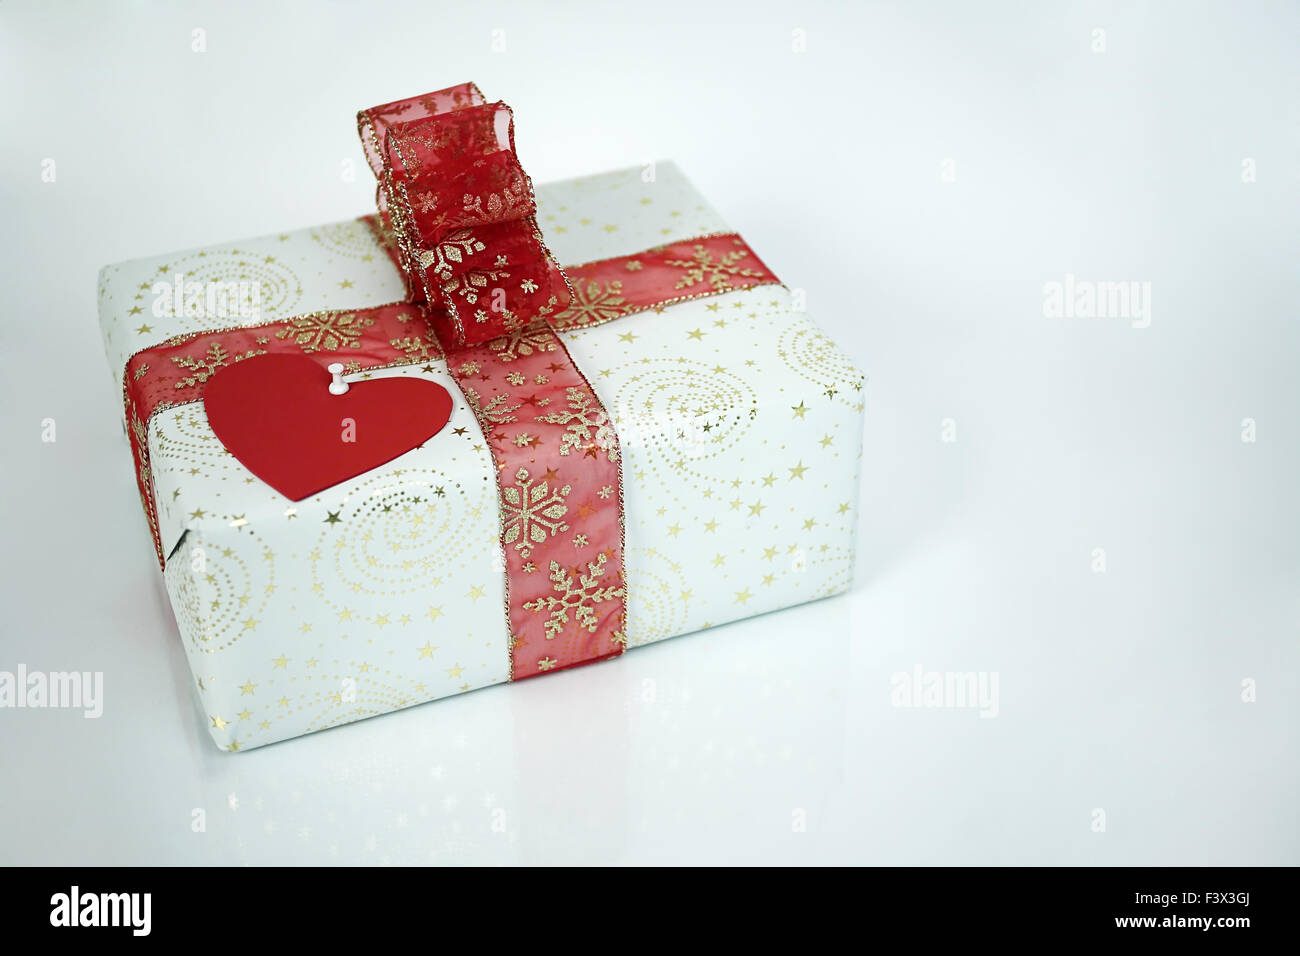 Christmas package Stock Photo